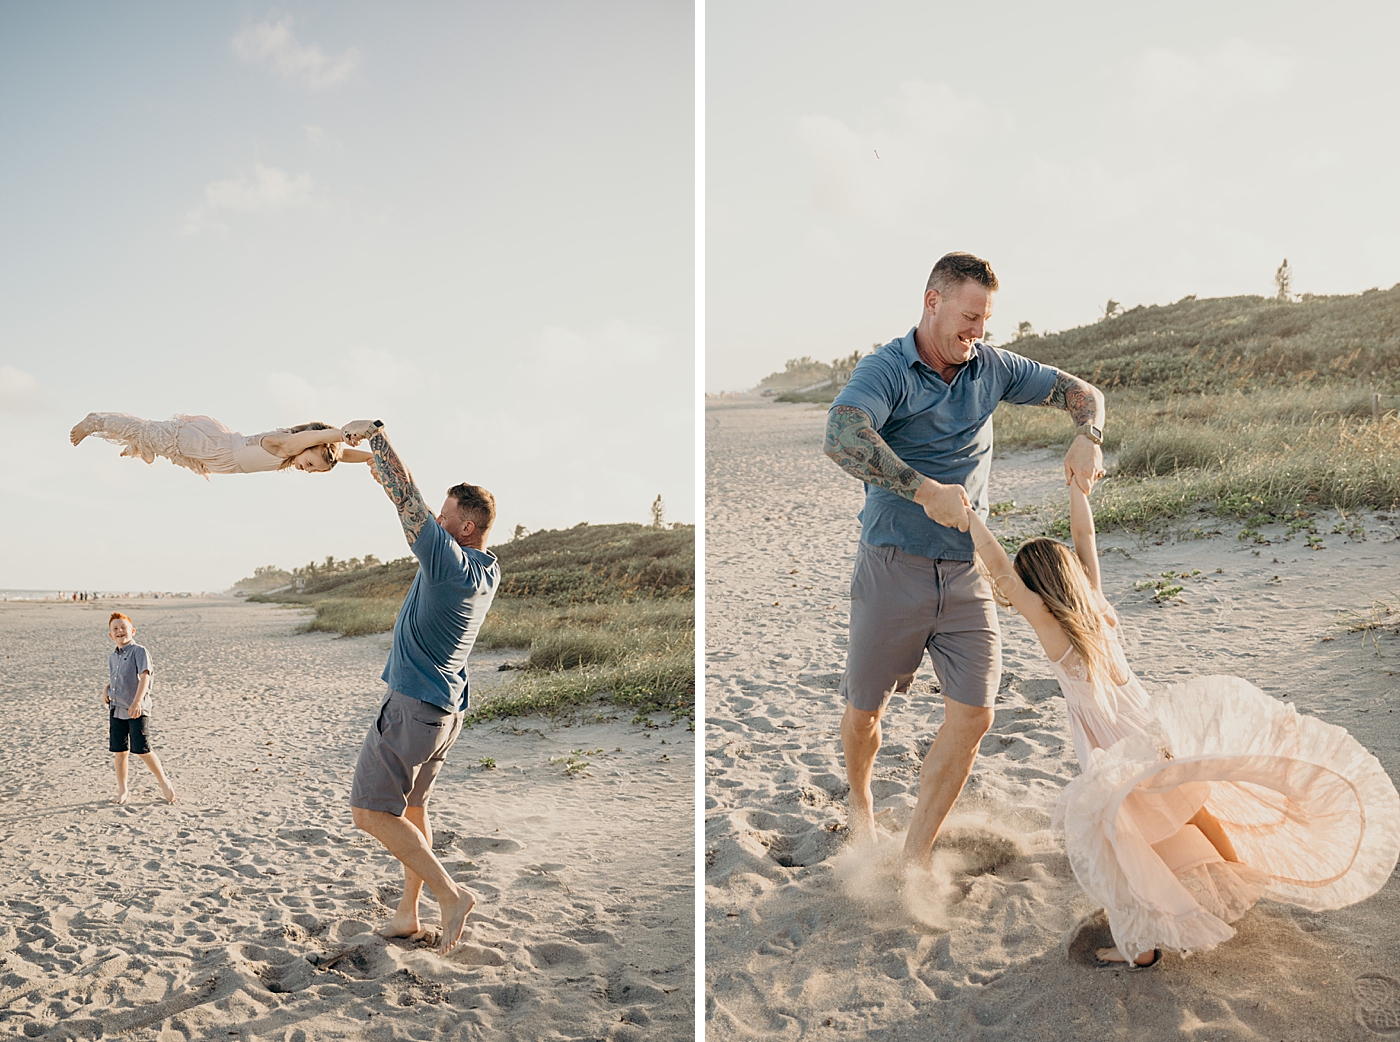 Dad swinging daughter by the arms on the beach Ocean Ridge Hammock Park Family Photography by South Florida Family Photographer Maggie Alvarez Photography